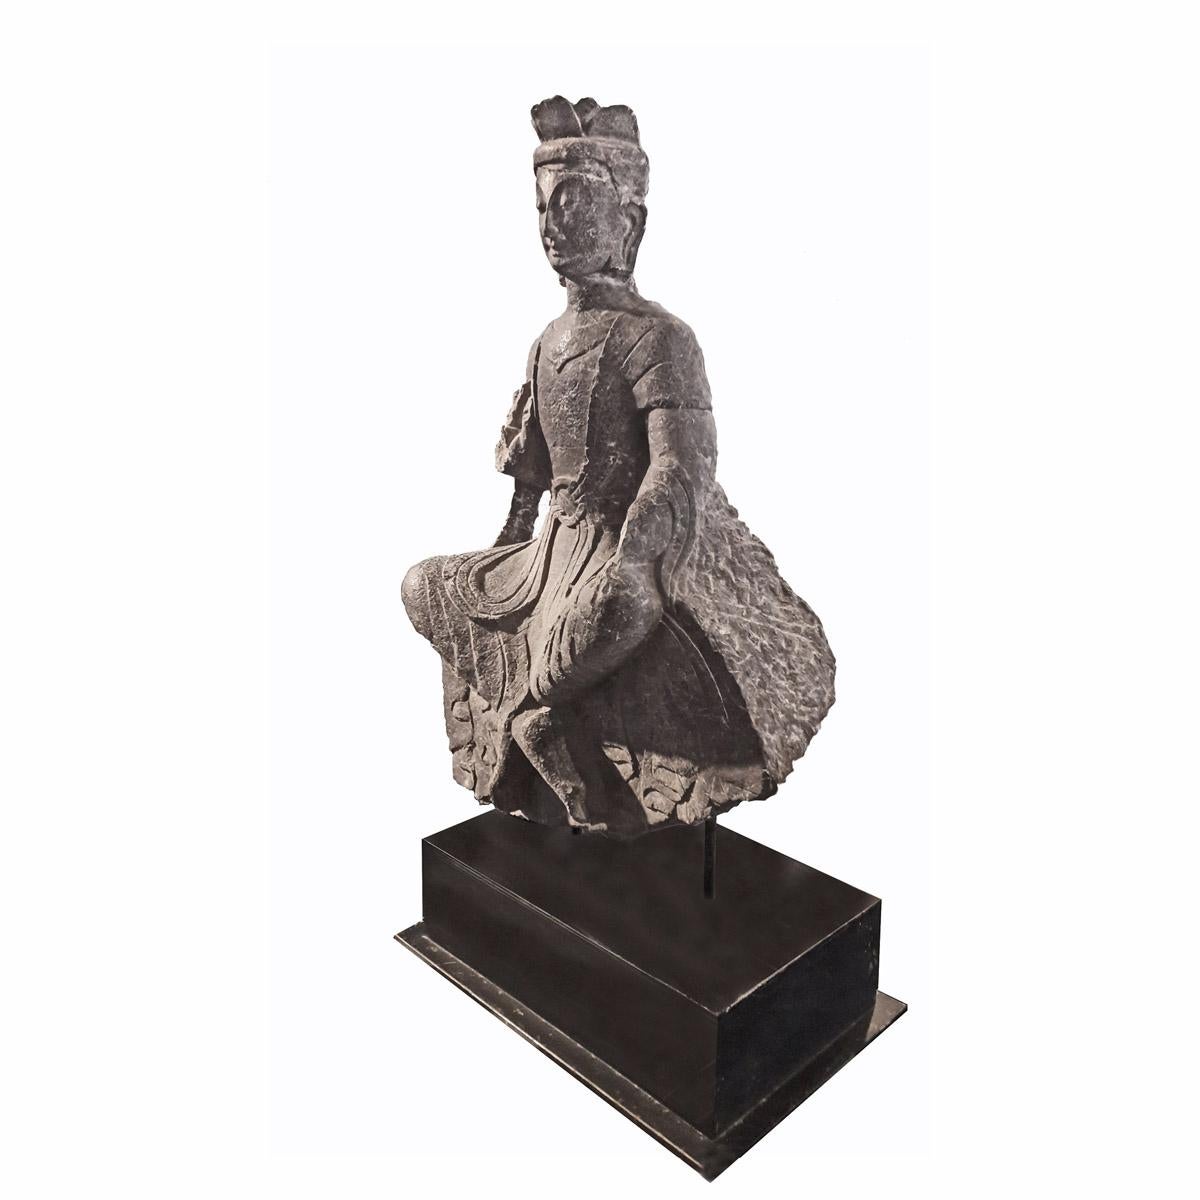 An antique statue of a Bodhisattva, Sanskrit term for one who, motivated by great compassion, demonstrates spontaneous desire to achieve Buddhahood (awakening). This 18th century Chinese sculpture of a Bodhisattva, circa 1760, is carved out of solid